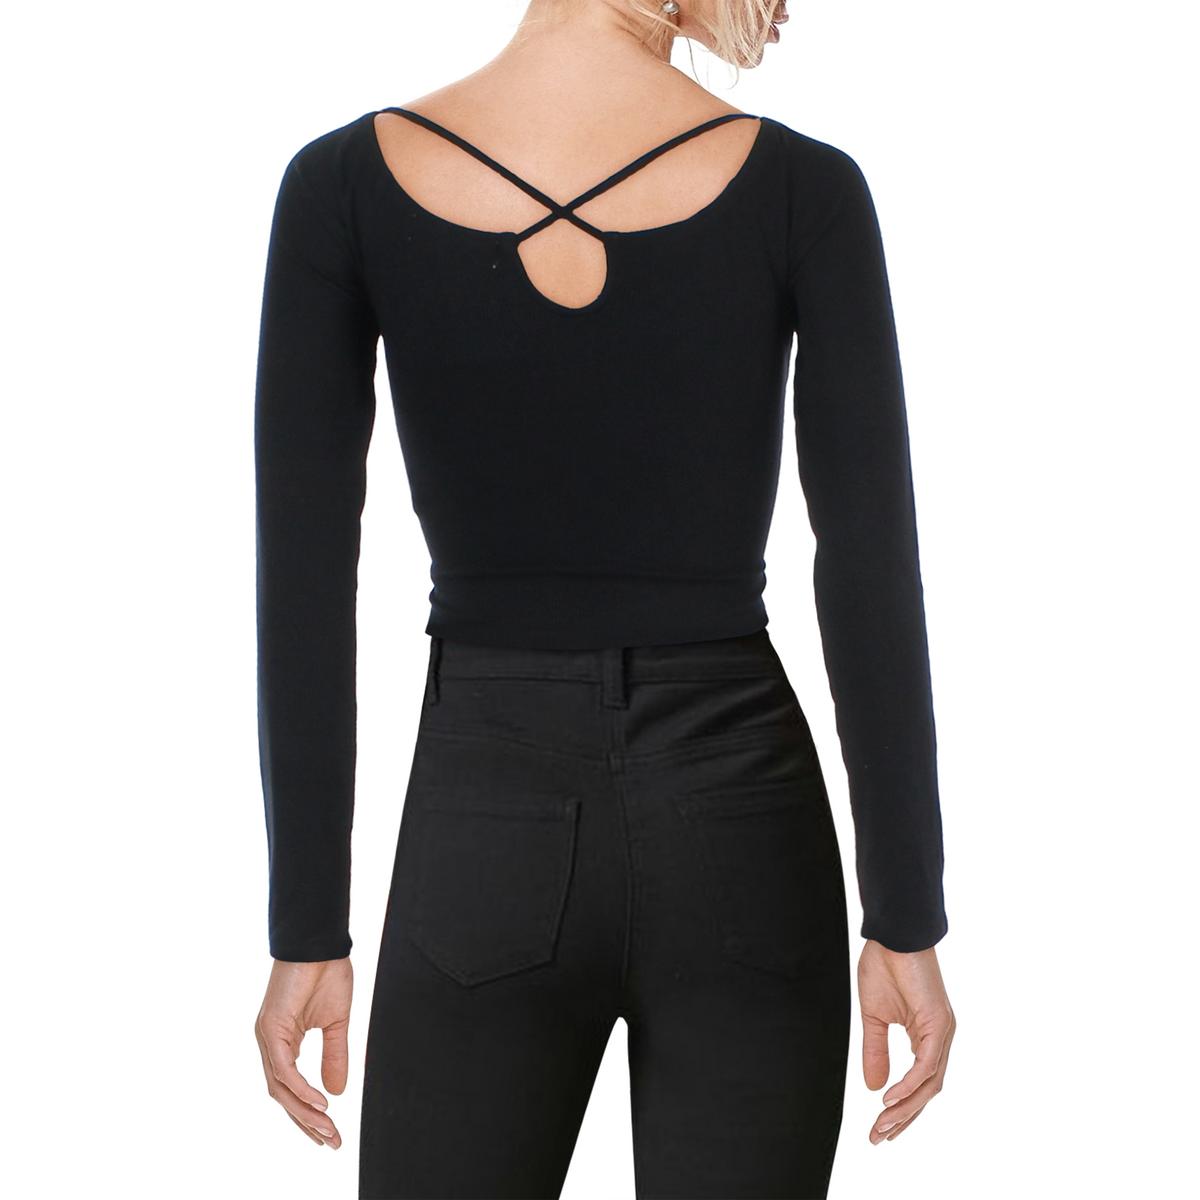 ALMOST FAMOUS Womens Black Stretch Ruched Tie Long Sleeve Jewel